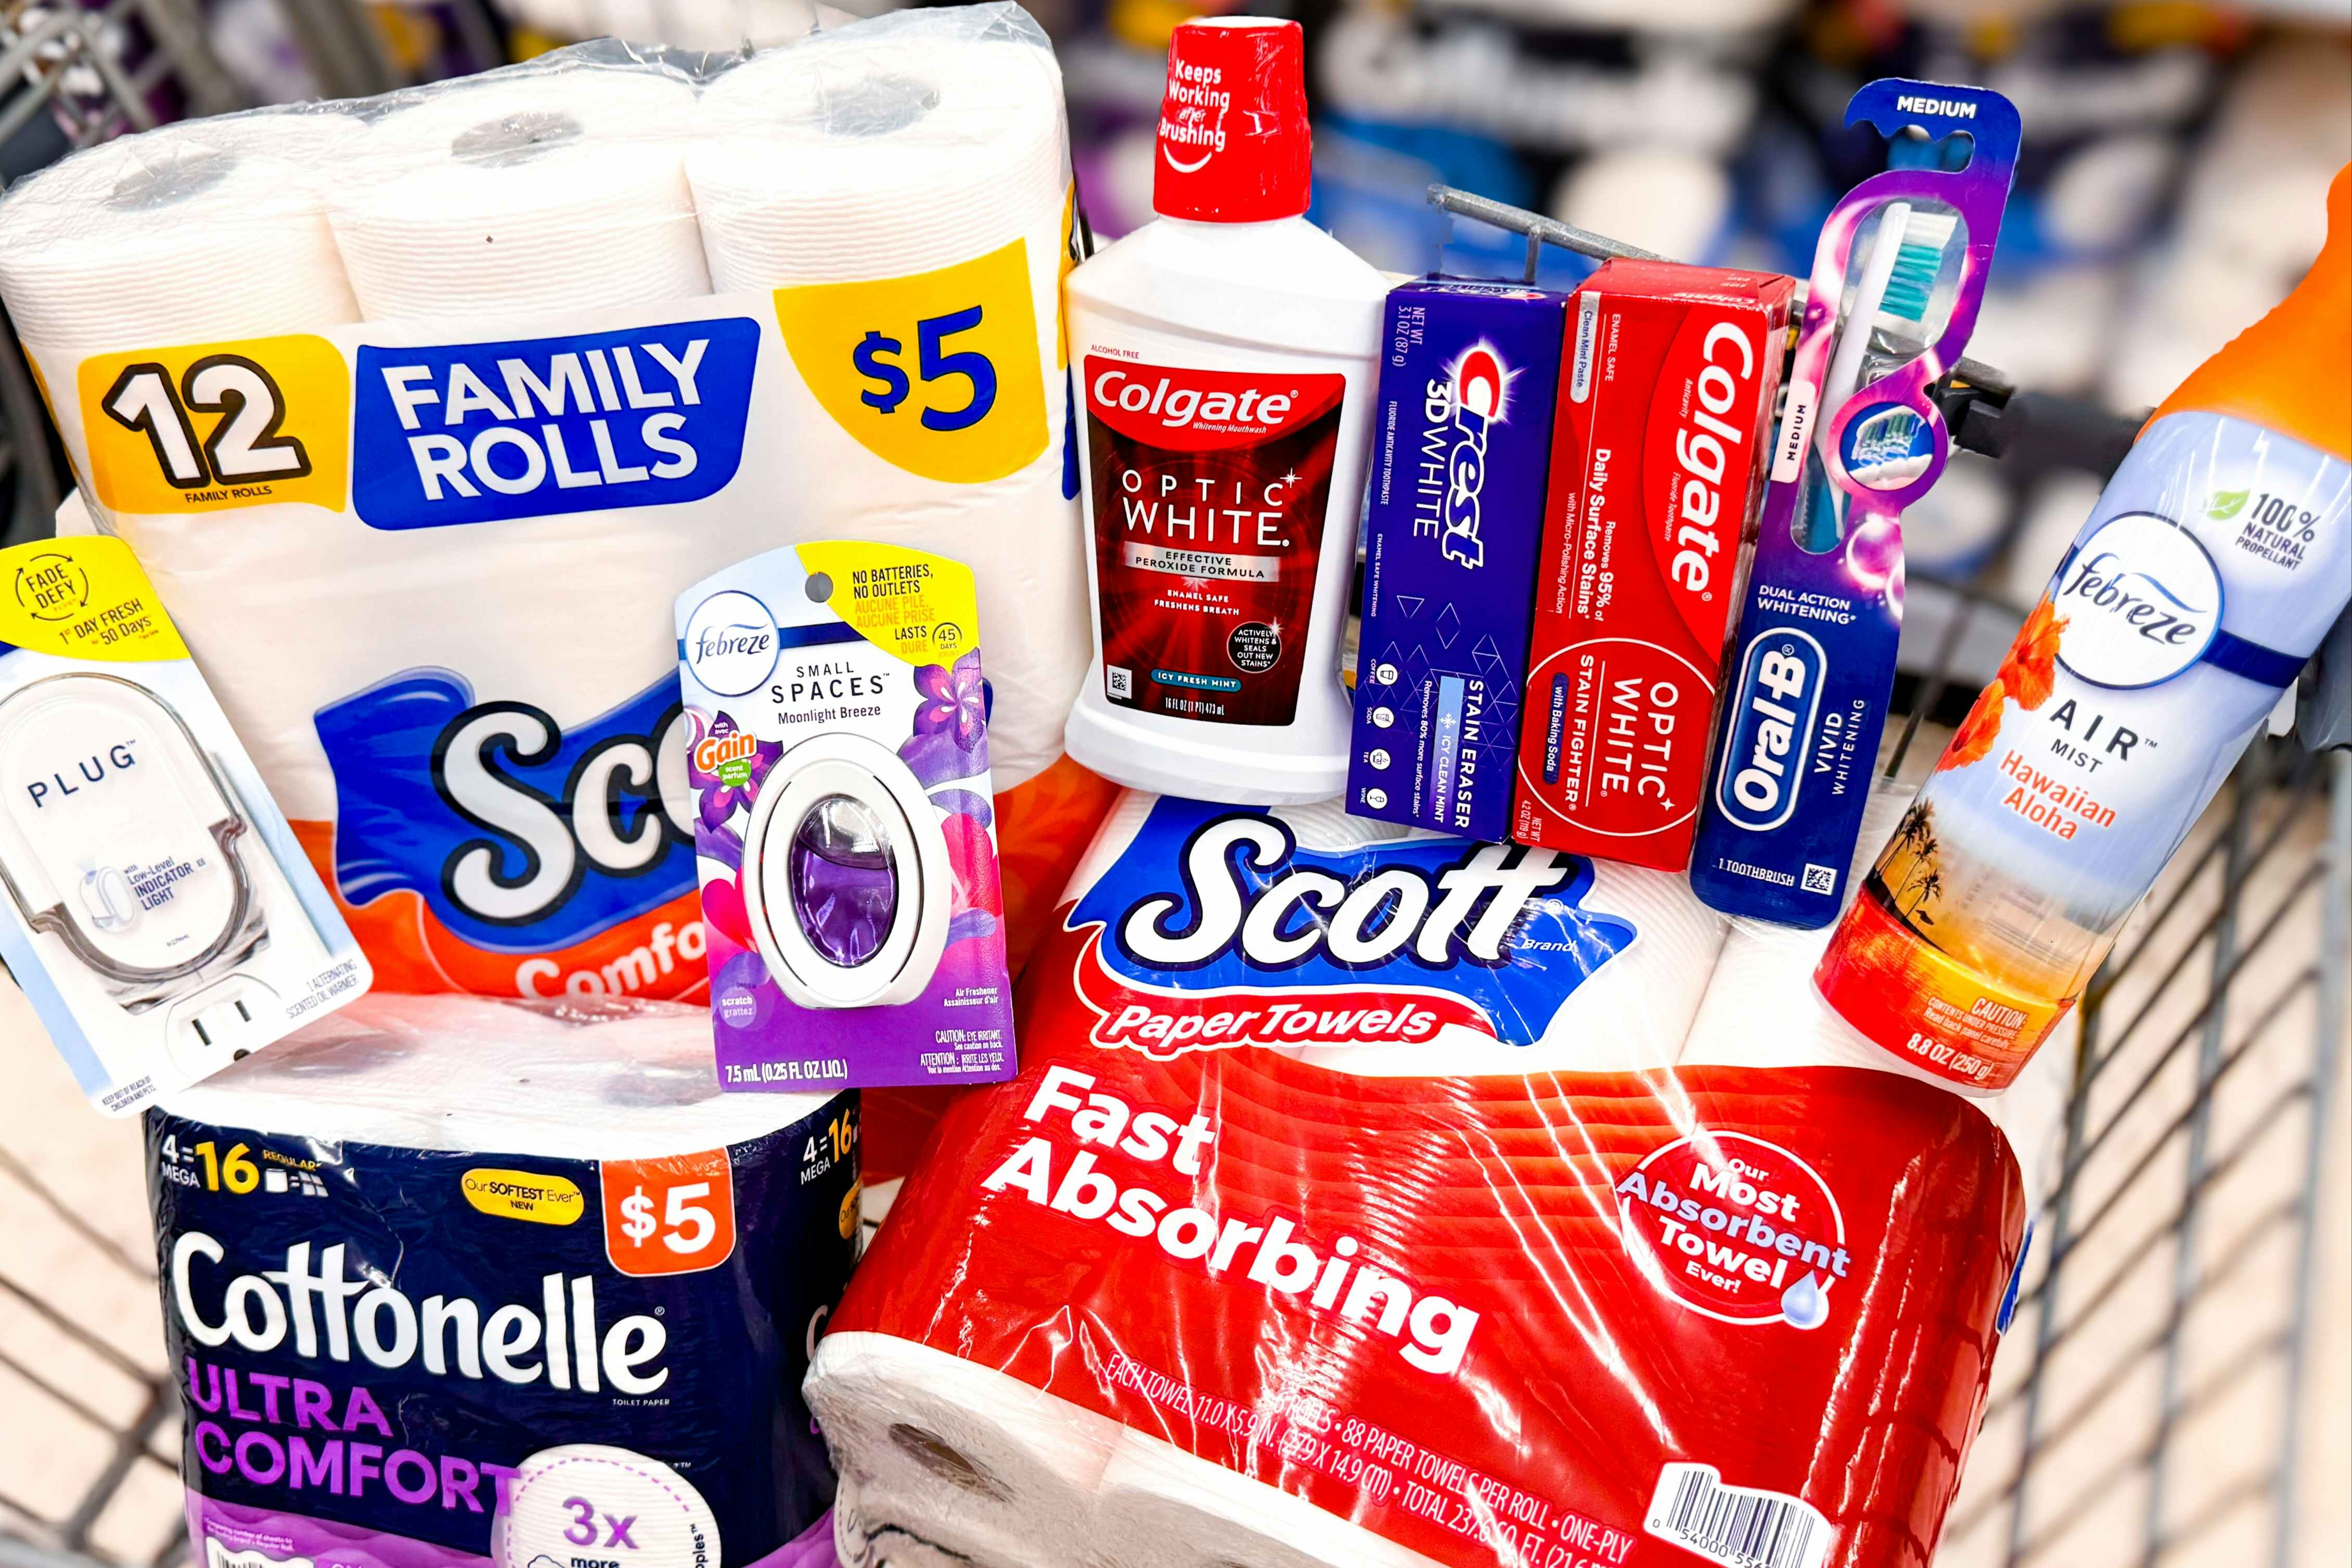 Score 10 Items Under $5 With This Walgreens Haul: Scott, Crest, and More